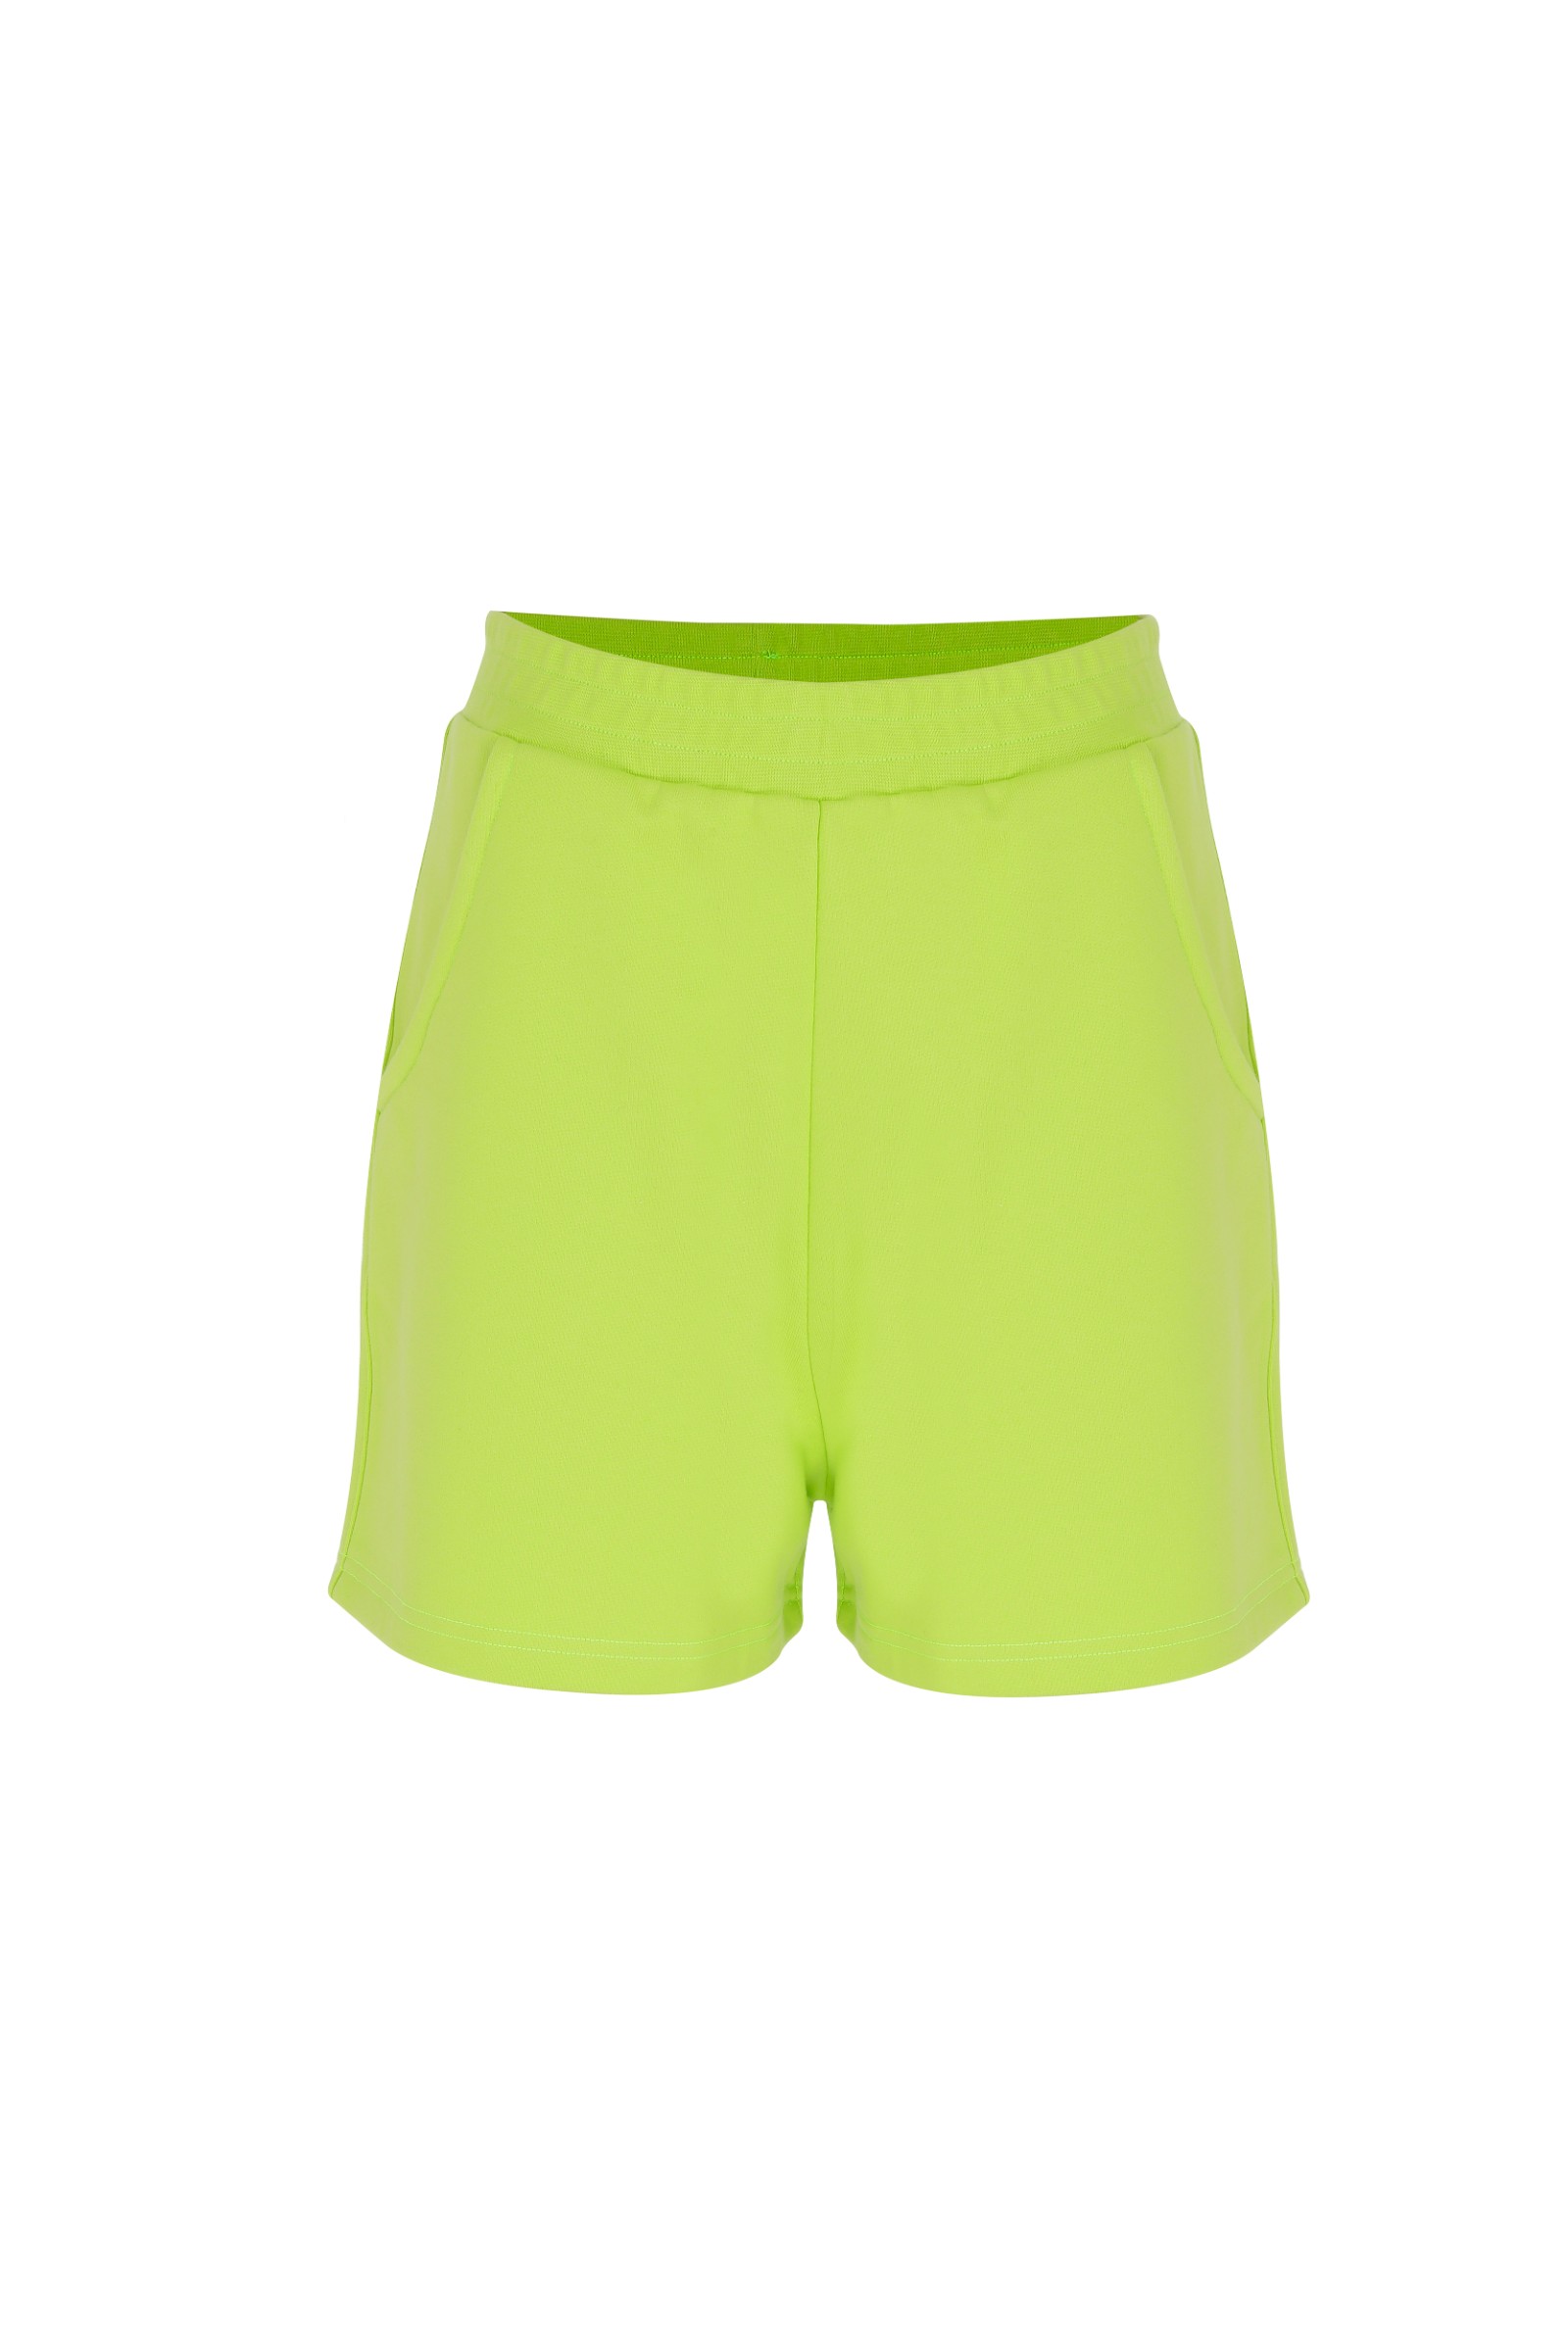 Willow Lime Womens Shorts 3